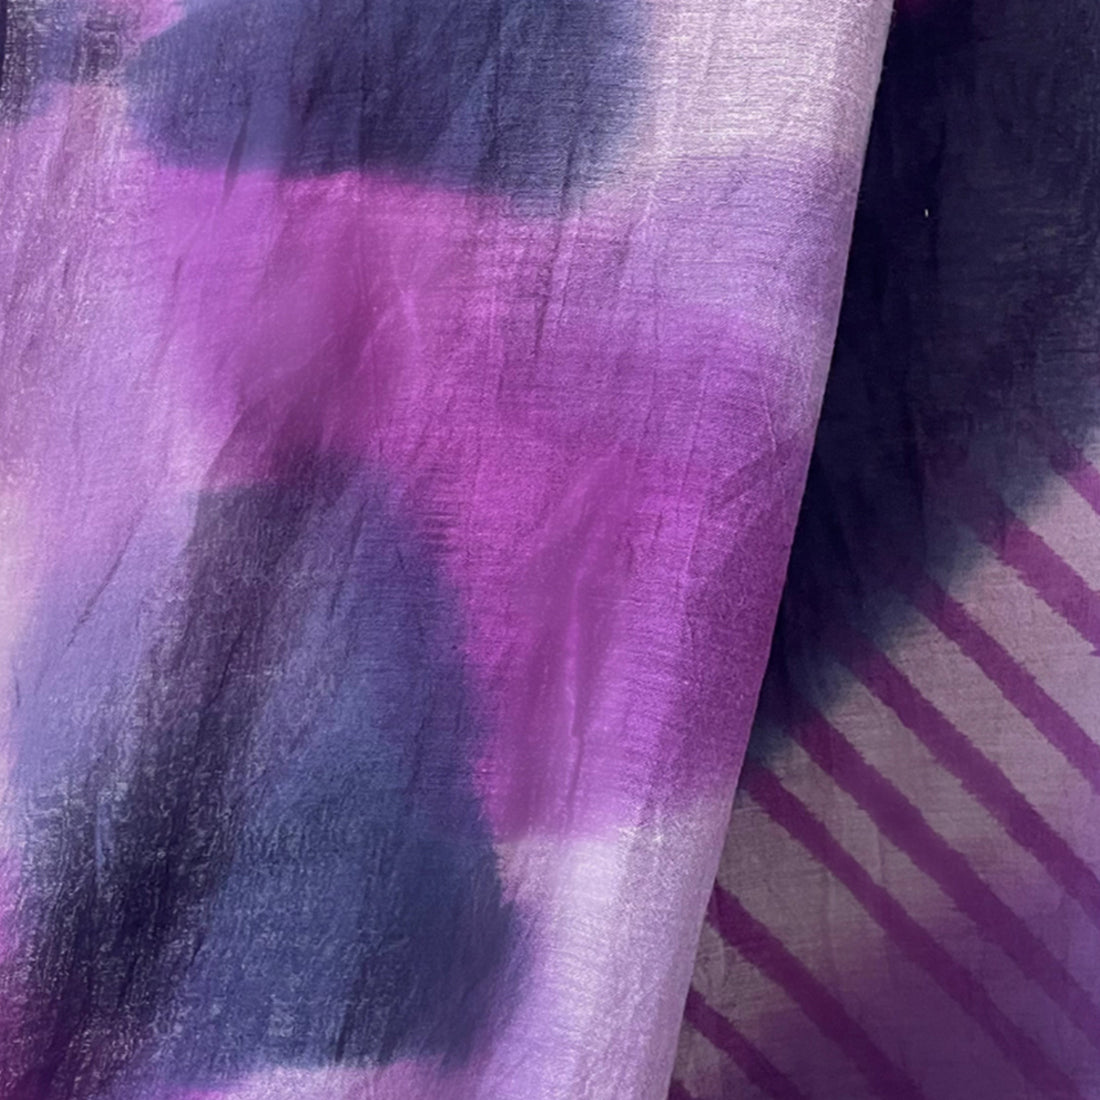 Criss-Cross Striped & Circular Patches Violet & Dark Blue Ombre Silk-Cotton Blend Crinkle Effect Scarf